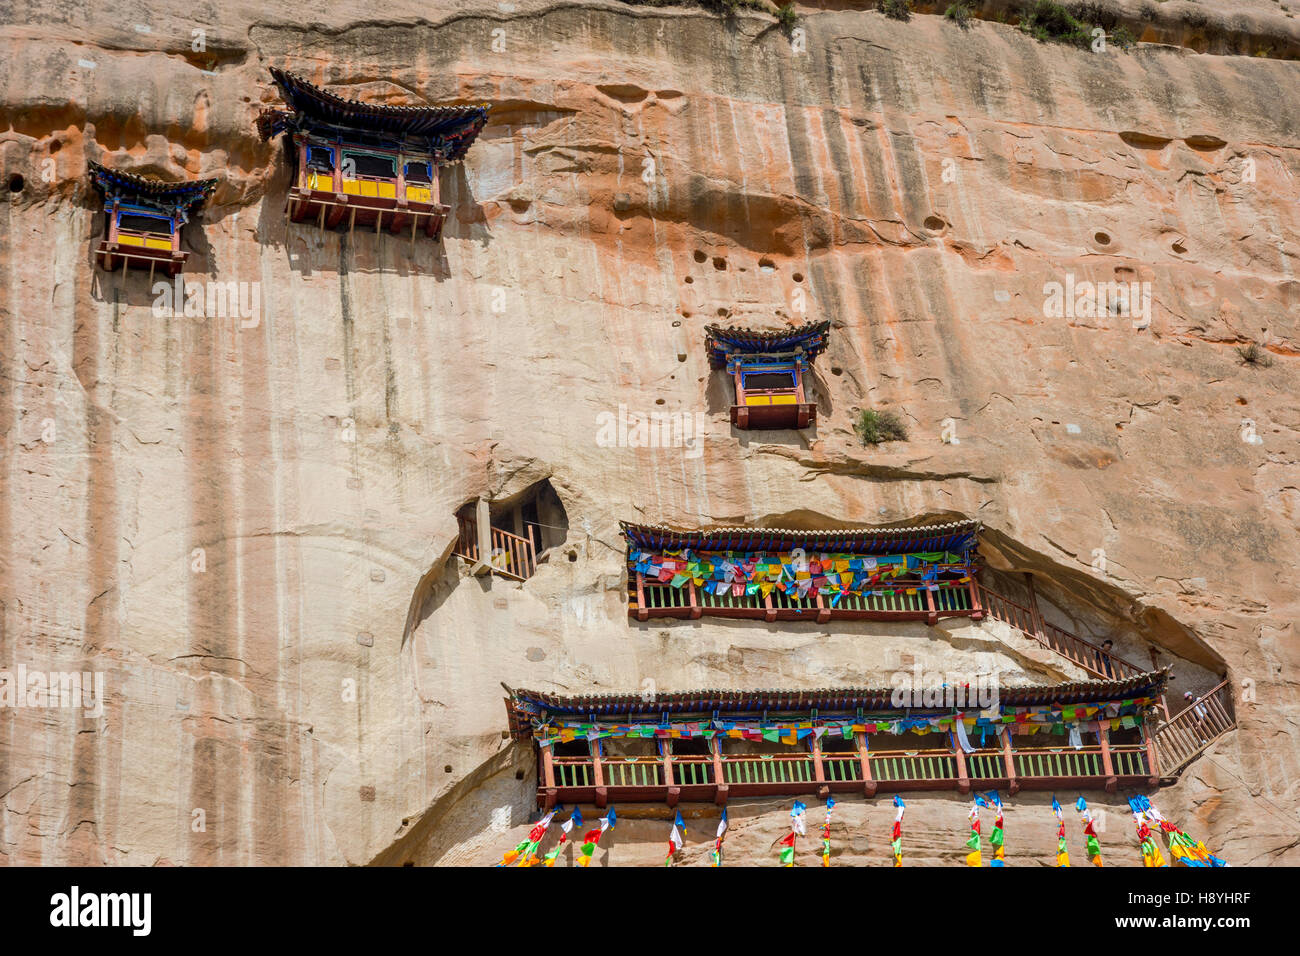 Mati Si temple in the rock caves, Zhangye, Gansu province, China Stock Photo